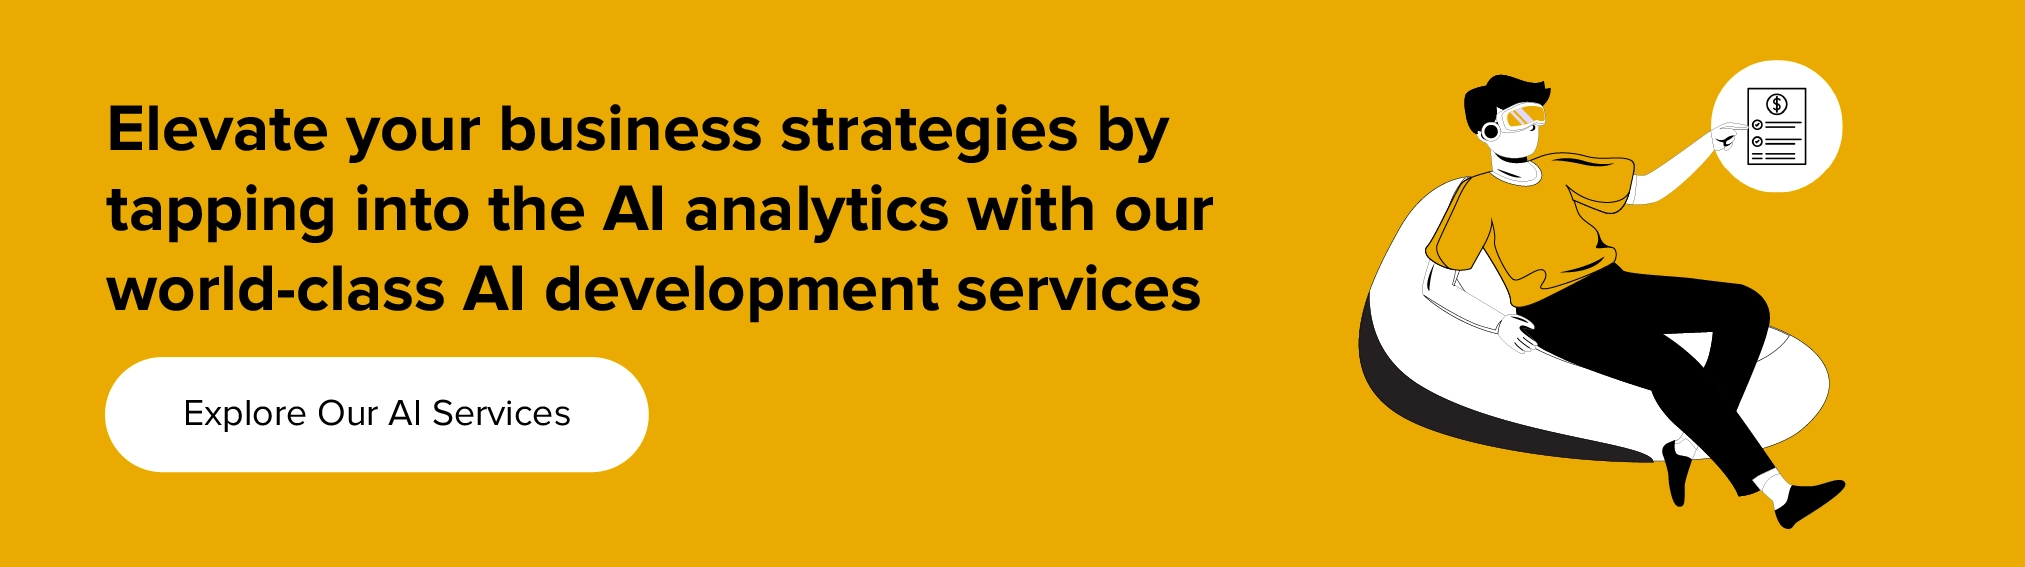 Tap into the future of AI analytics with our AI development services